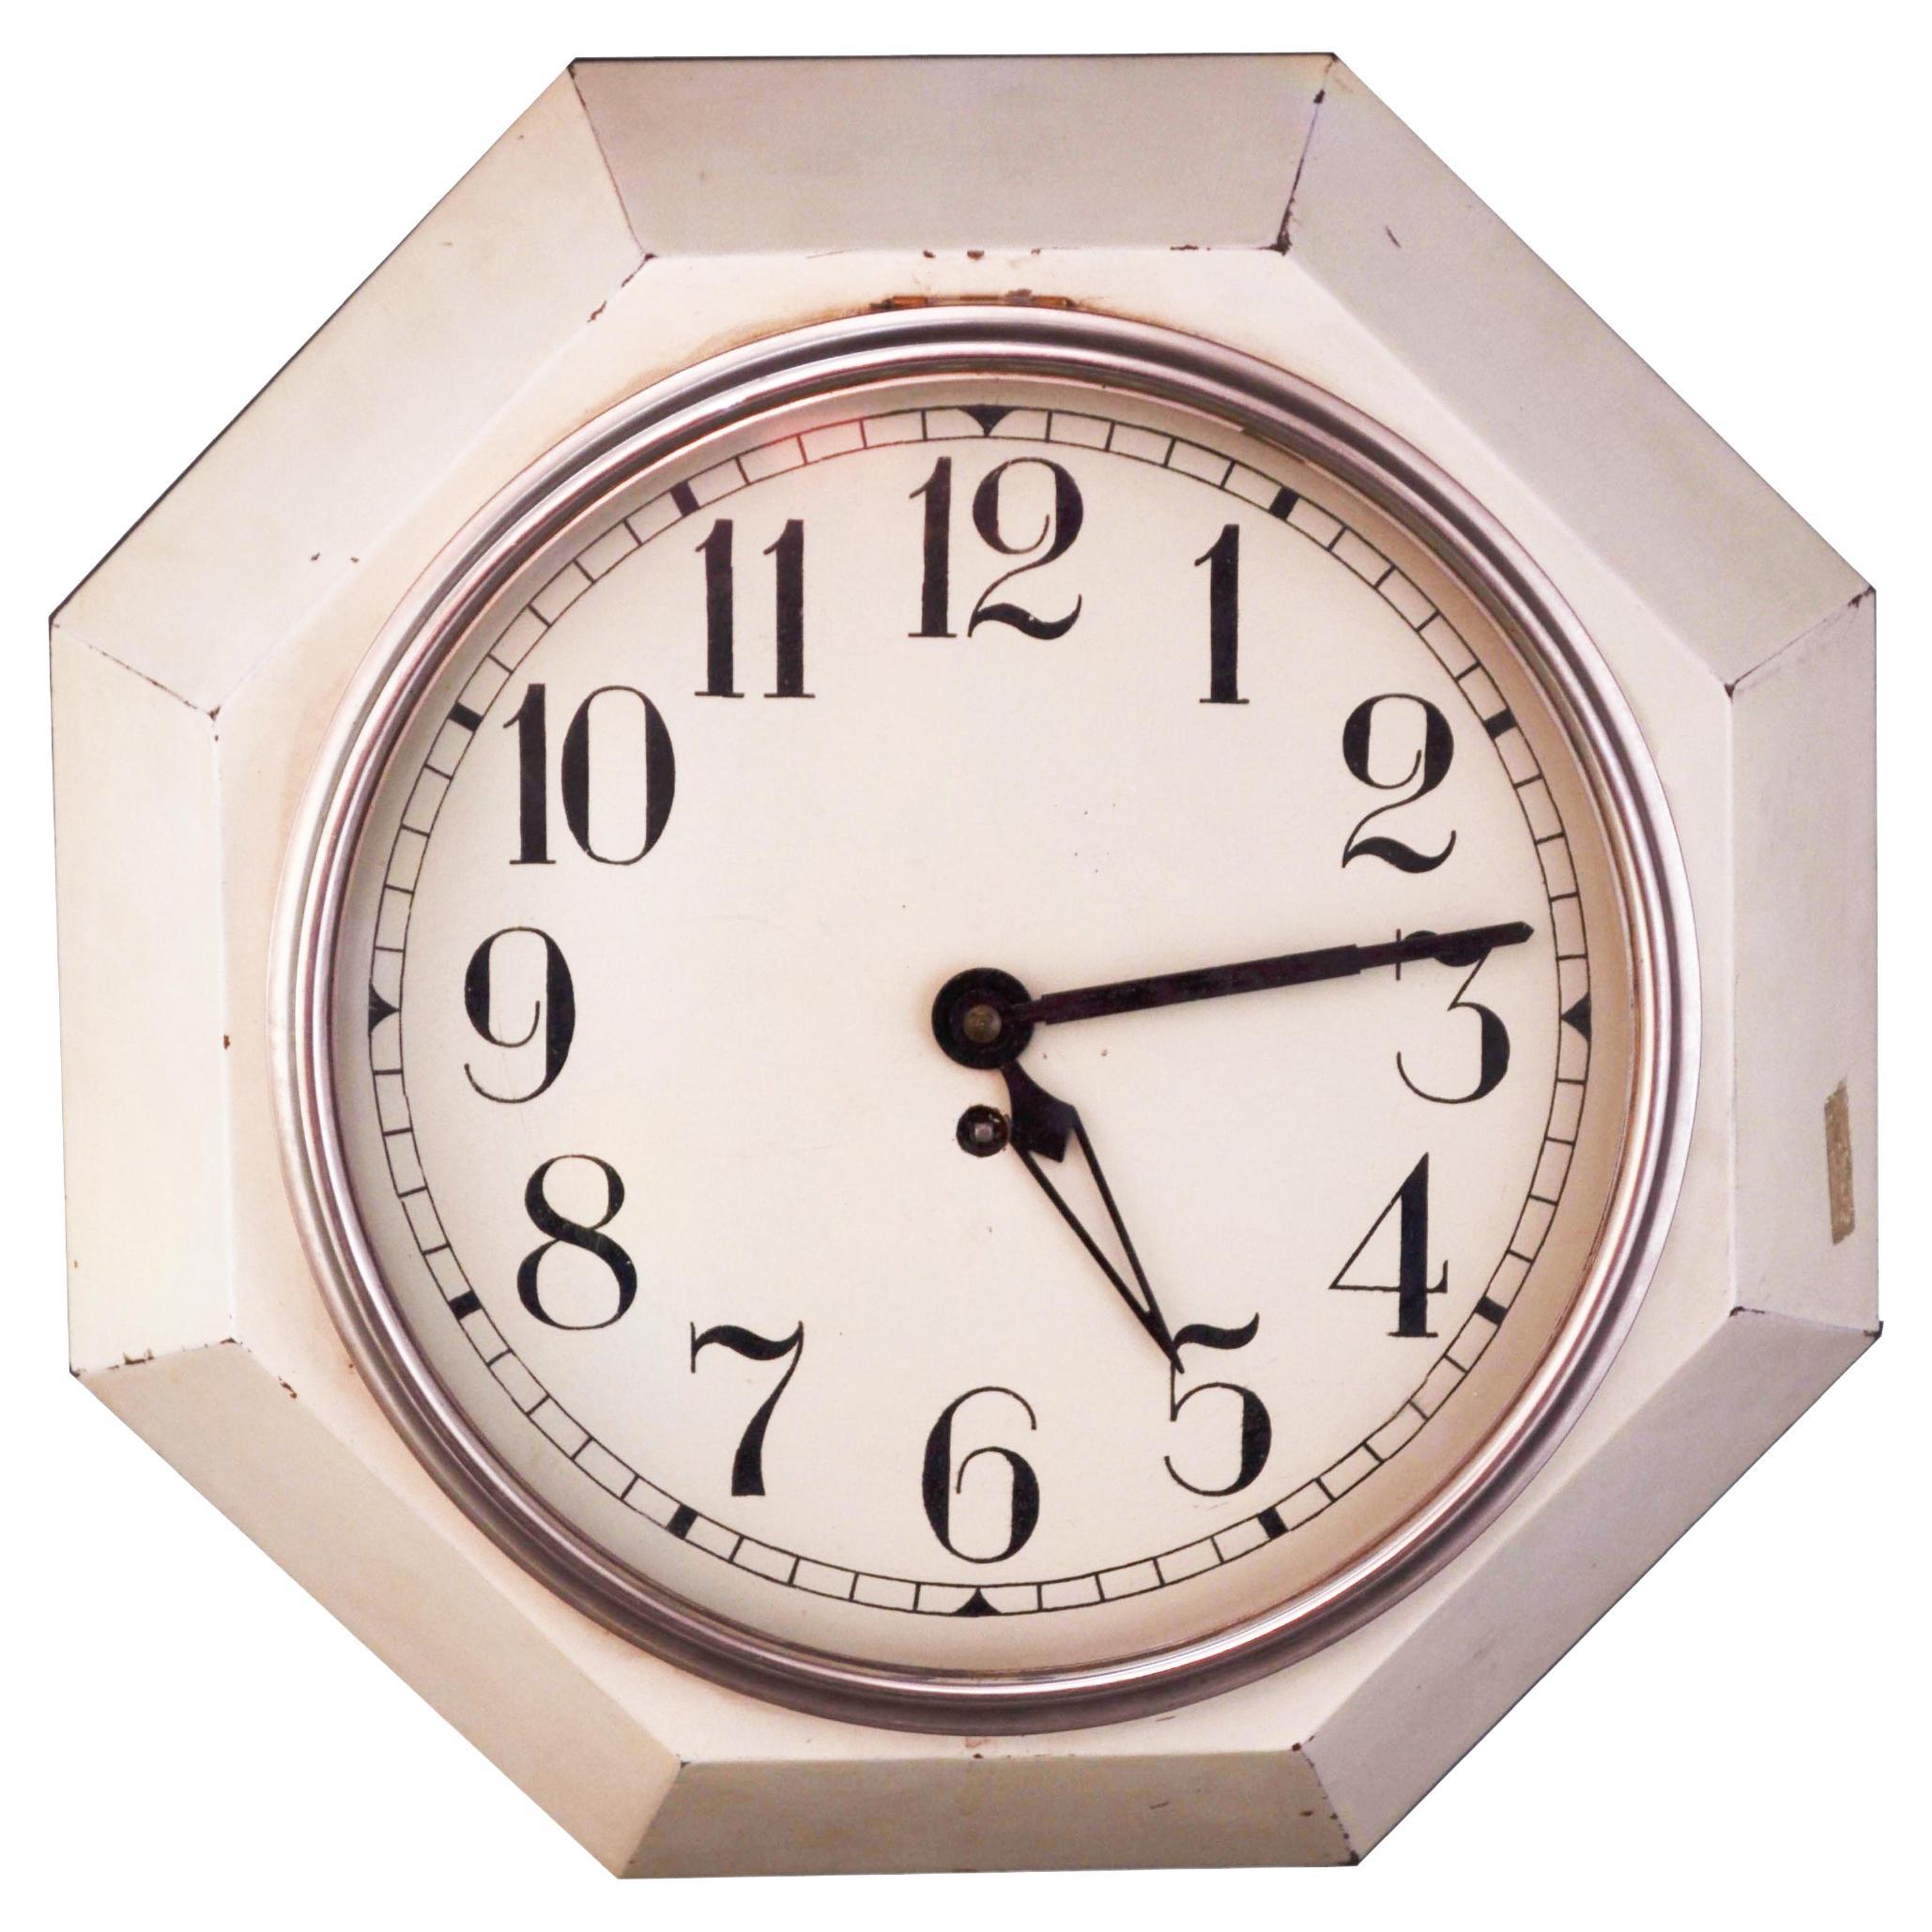 Original Art Deco Wall Clock by Adolf Loos Early 20th Century, Functioning For Sale